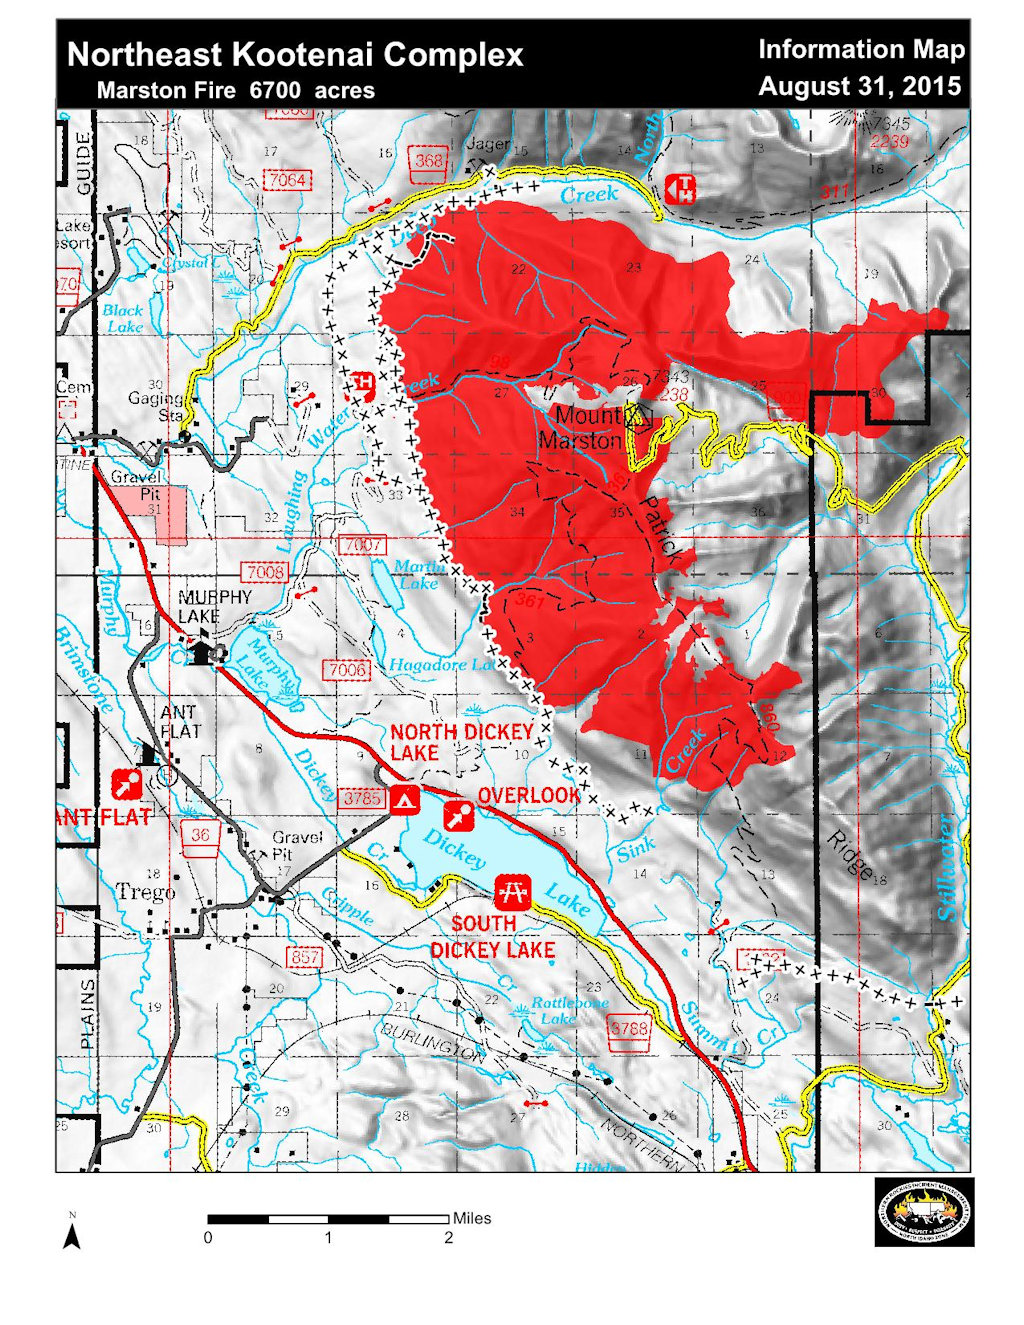 Marston Fire Information Map, Aug 31, 2015